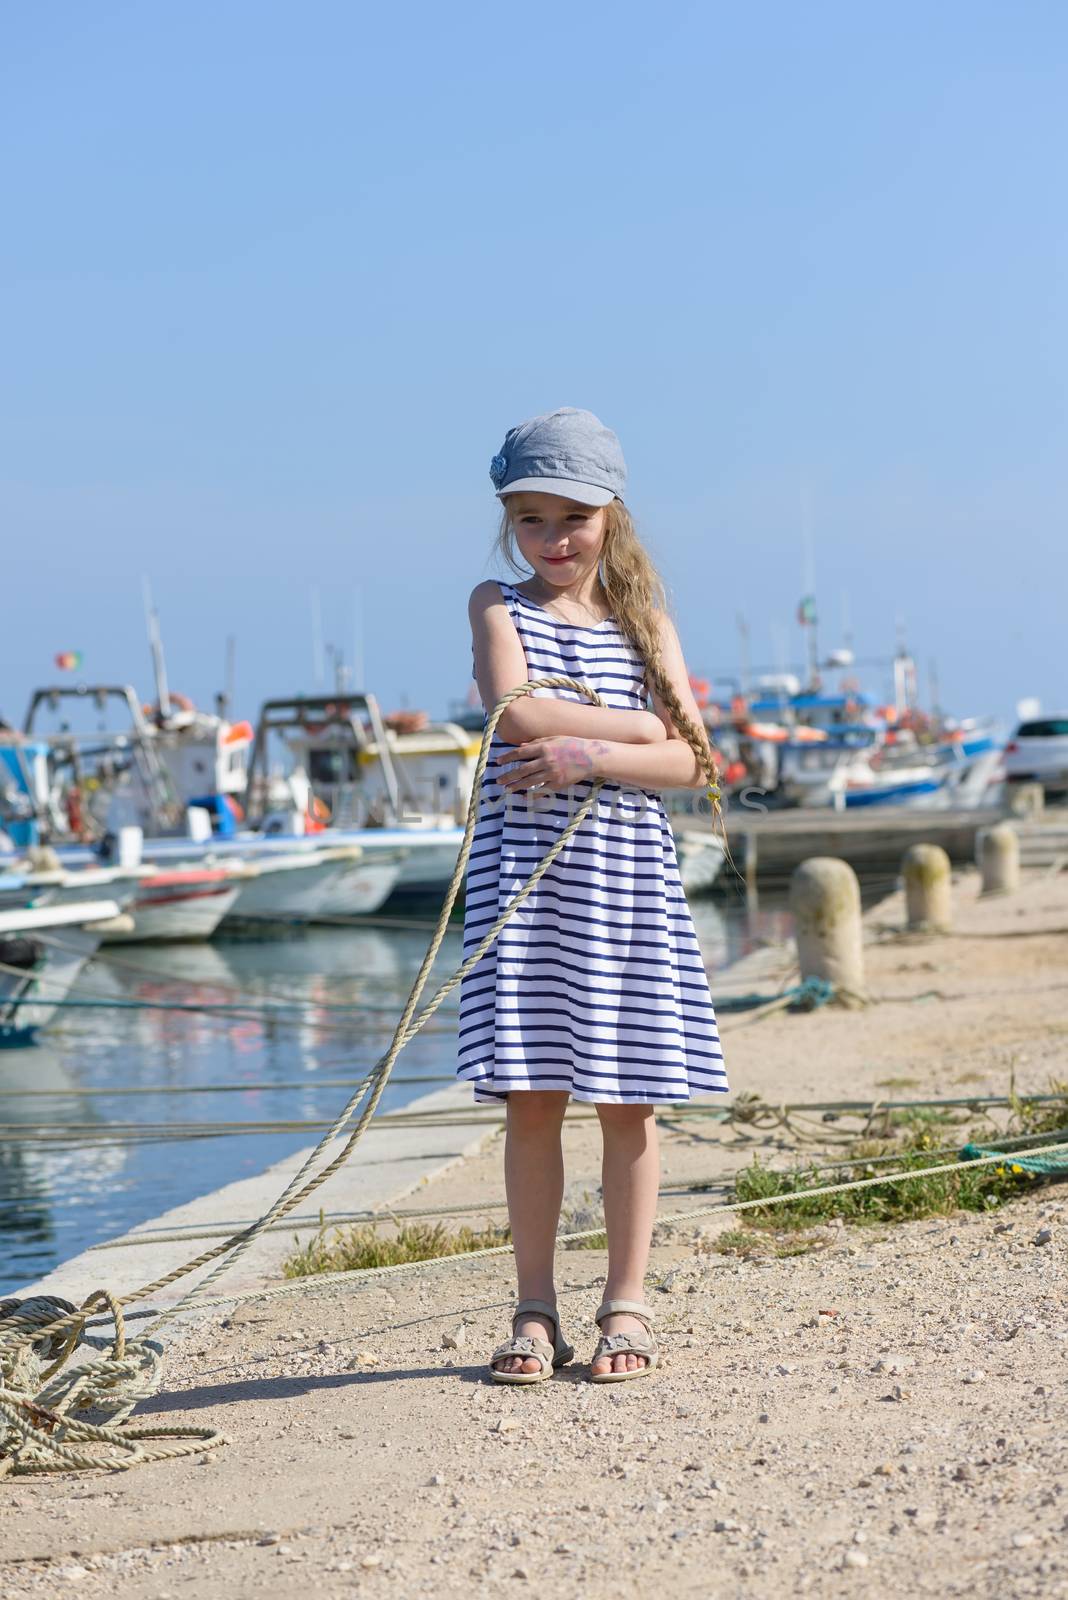 Adorable little girl at fisherman village by anytka